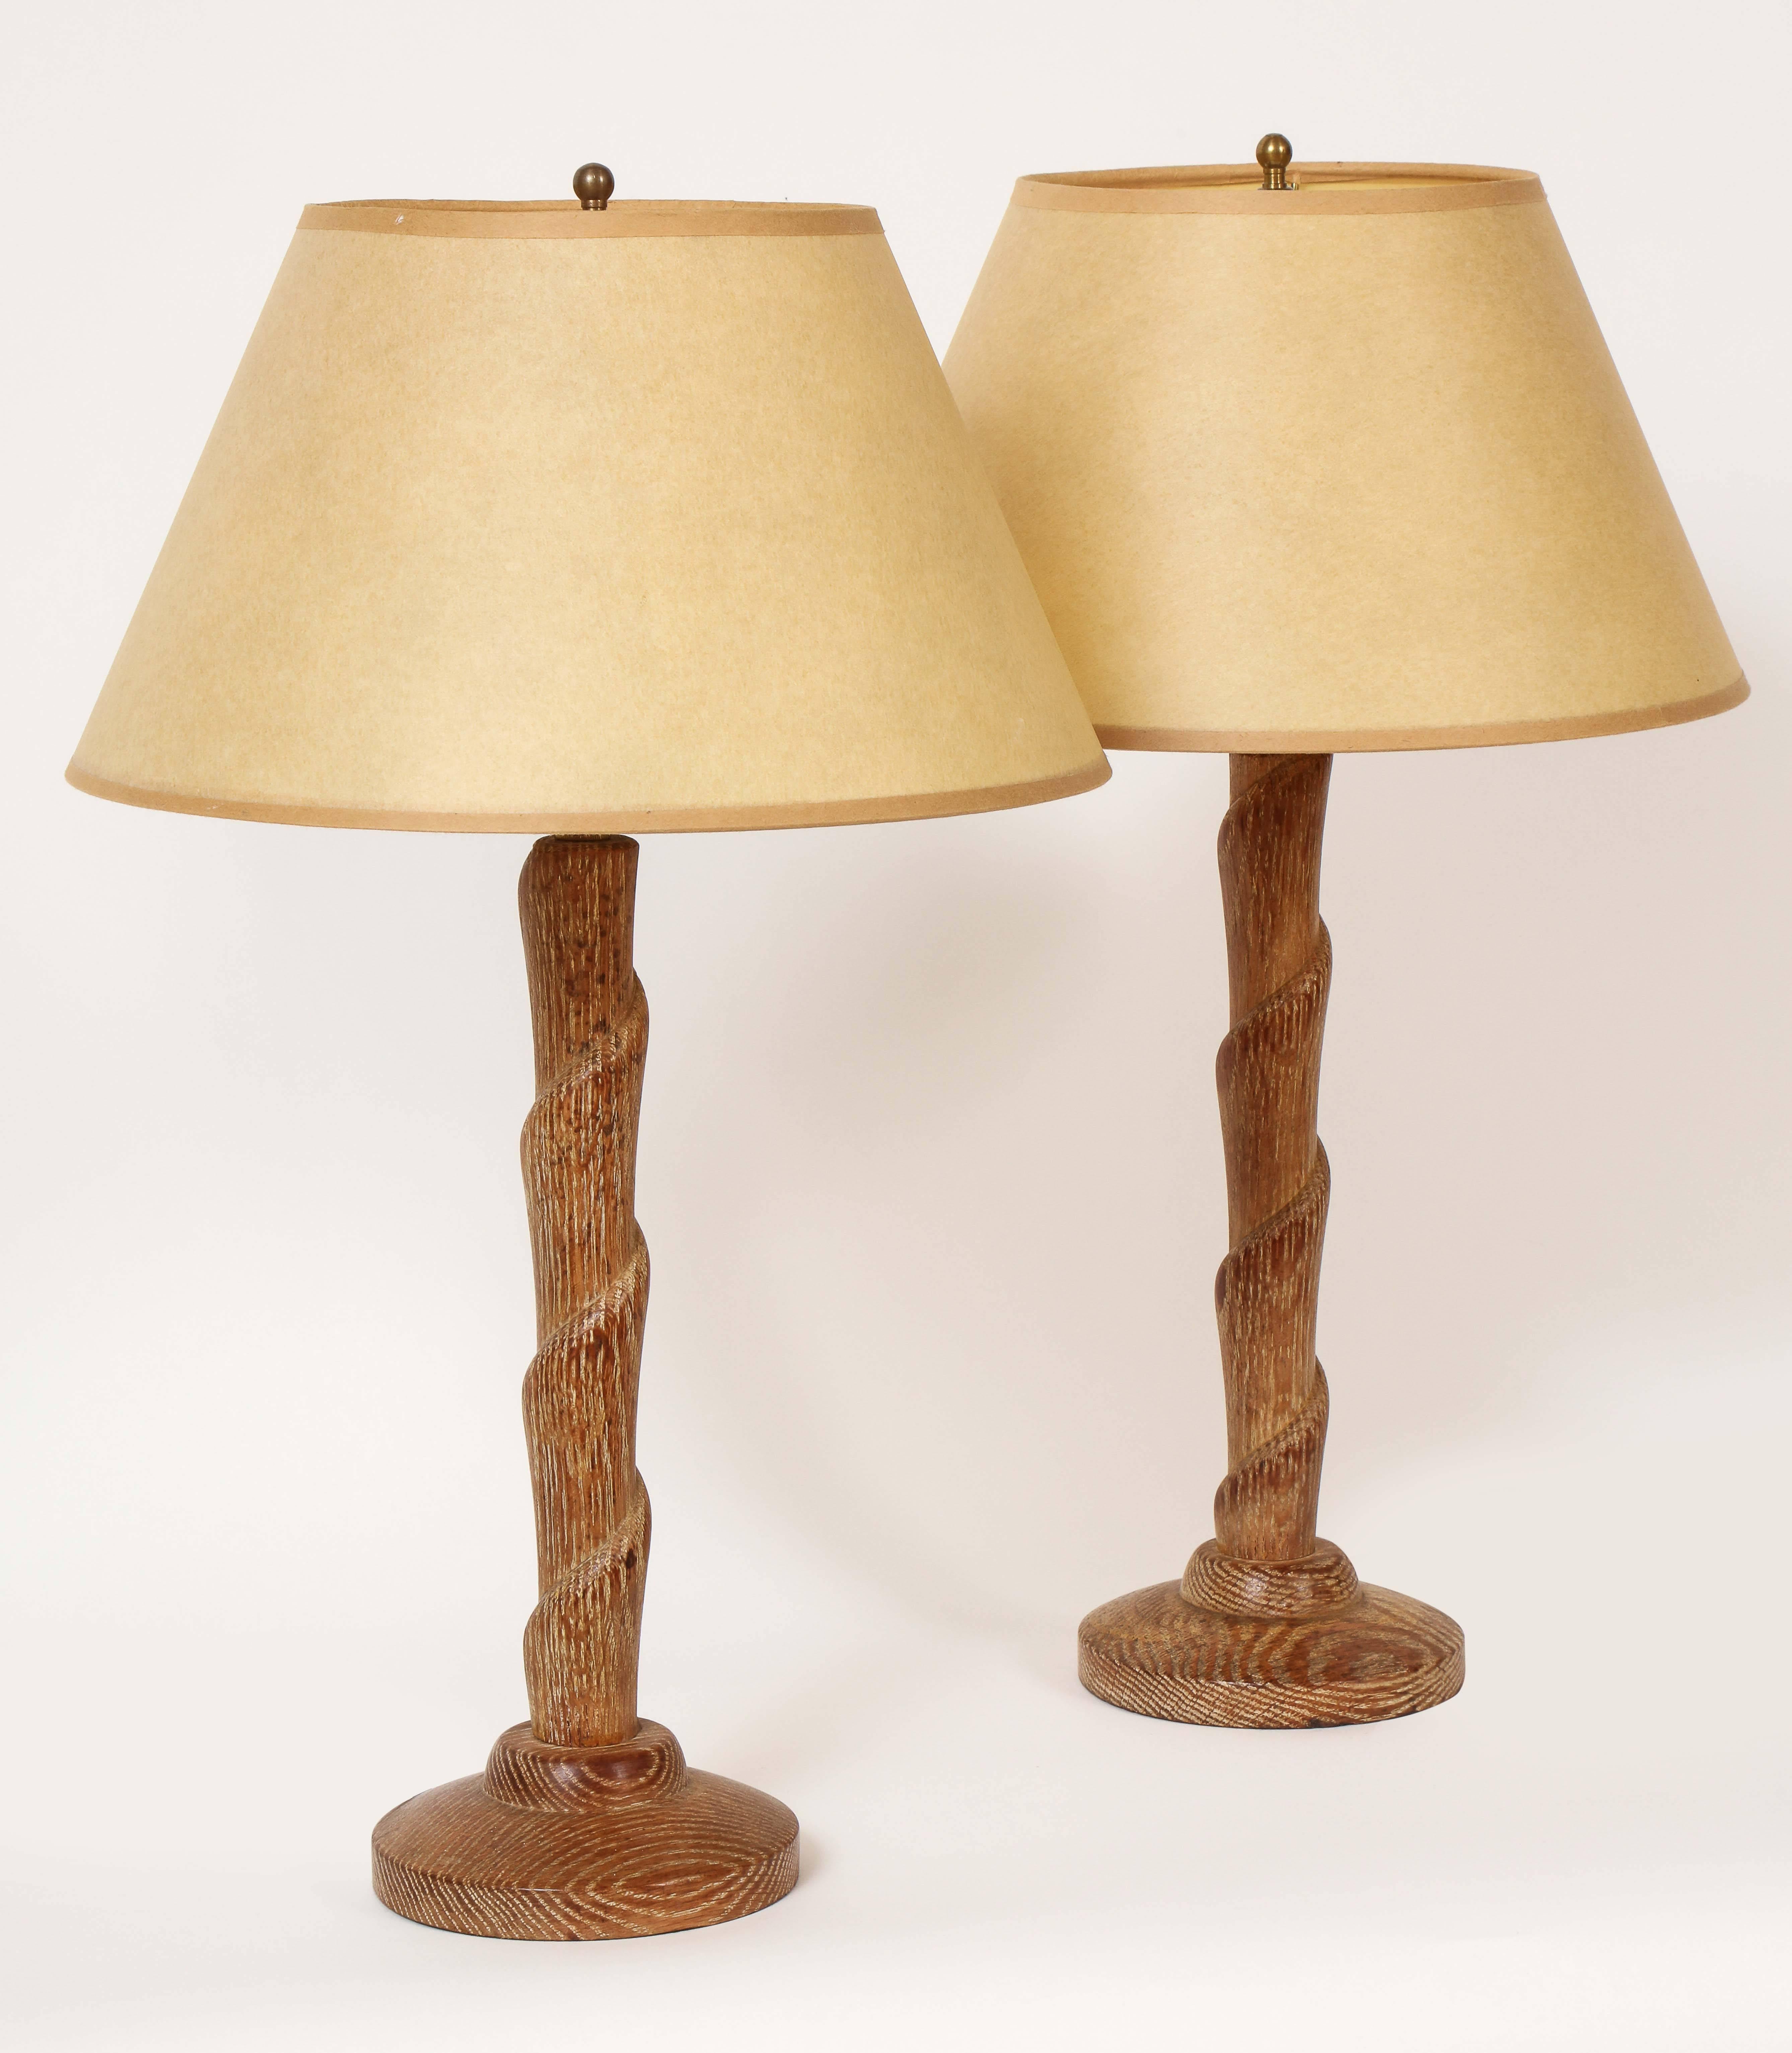 This pair of French modernist lamps, made of limed oak, each has a spirally turned stem raised on a slightly domed round base. These lamps were formally owned by the noted antiques dealer and taste arbiter, Garrick Stephenson.